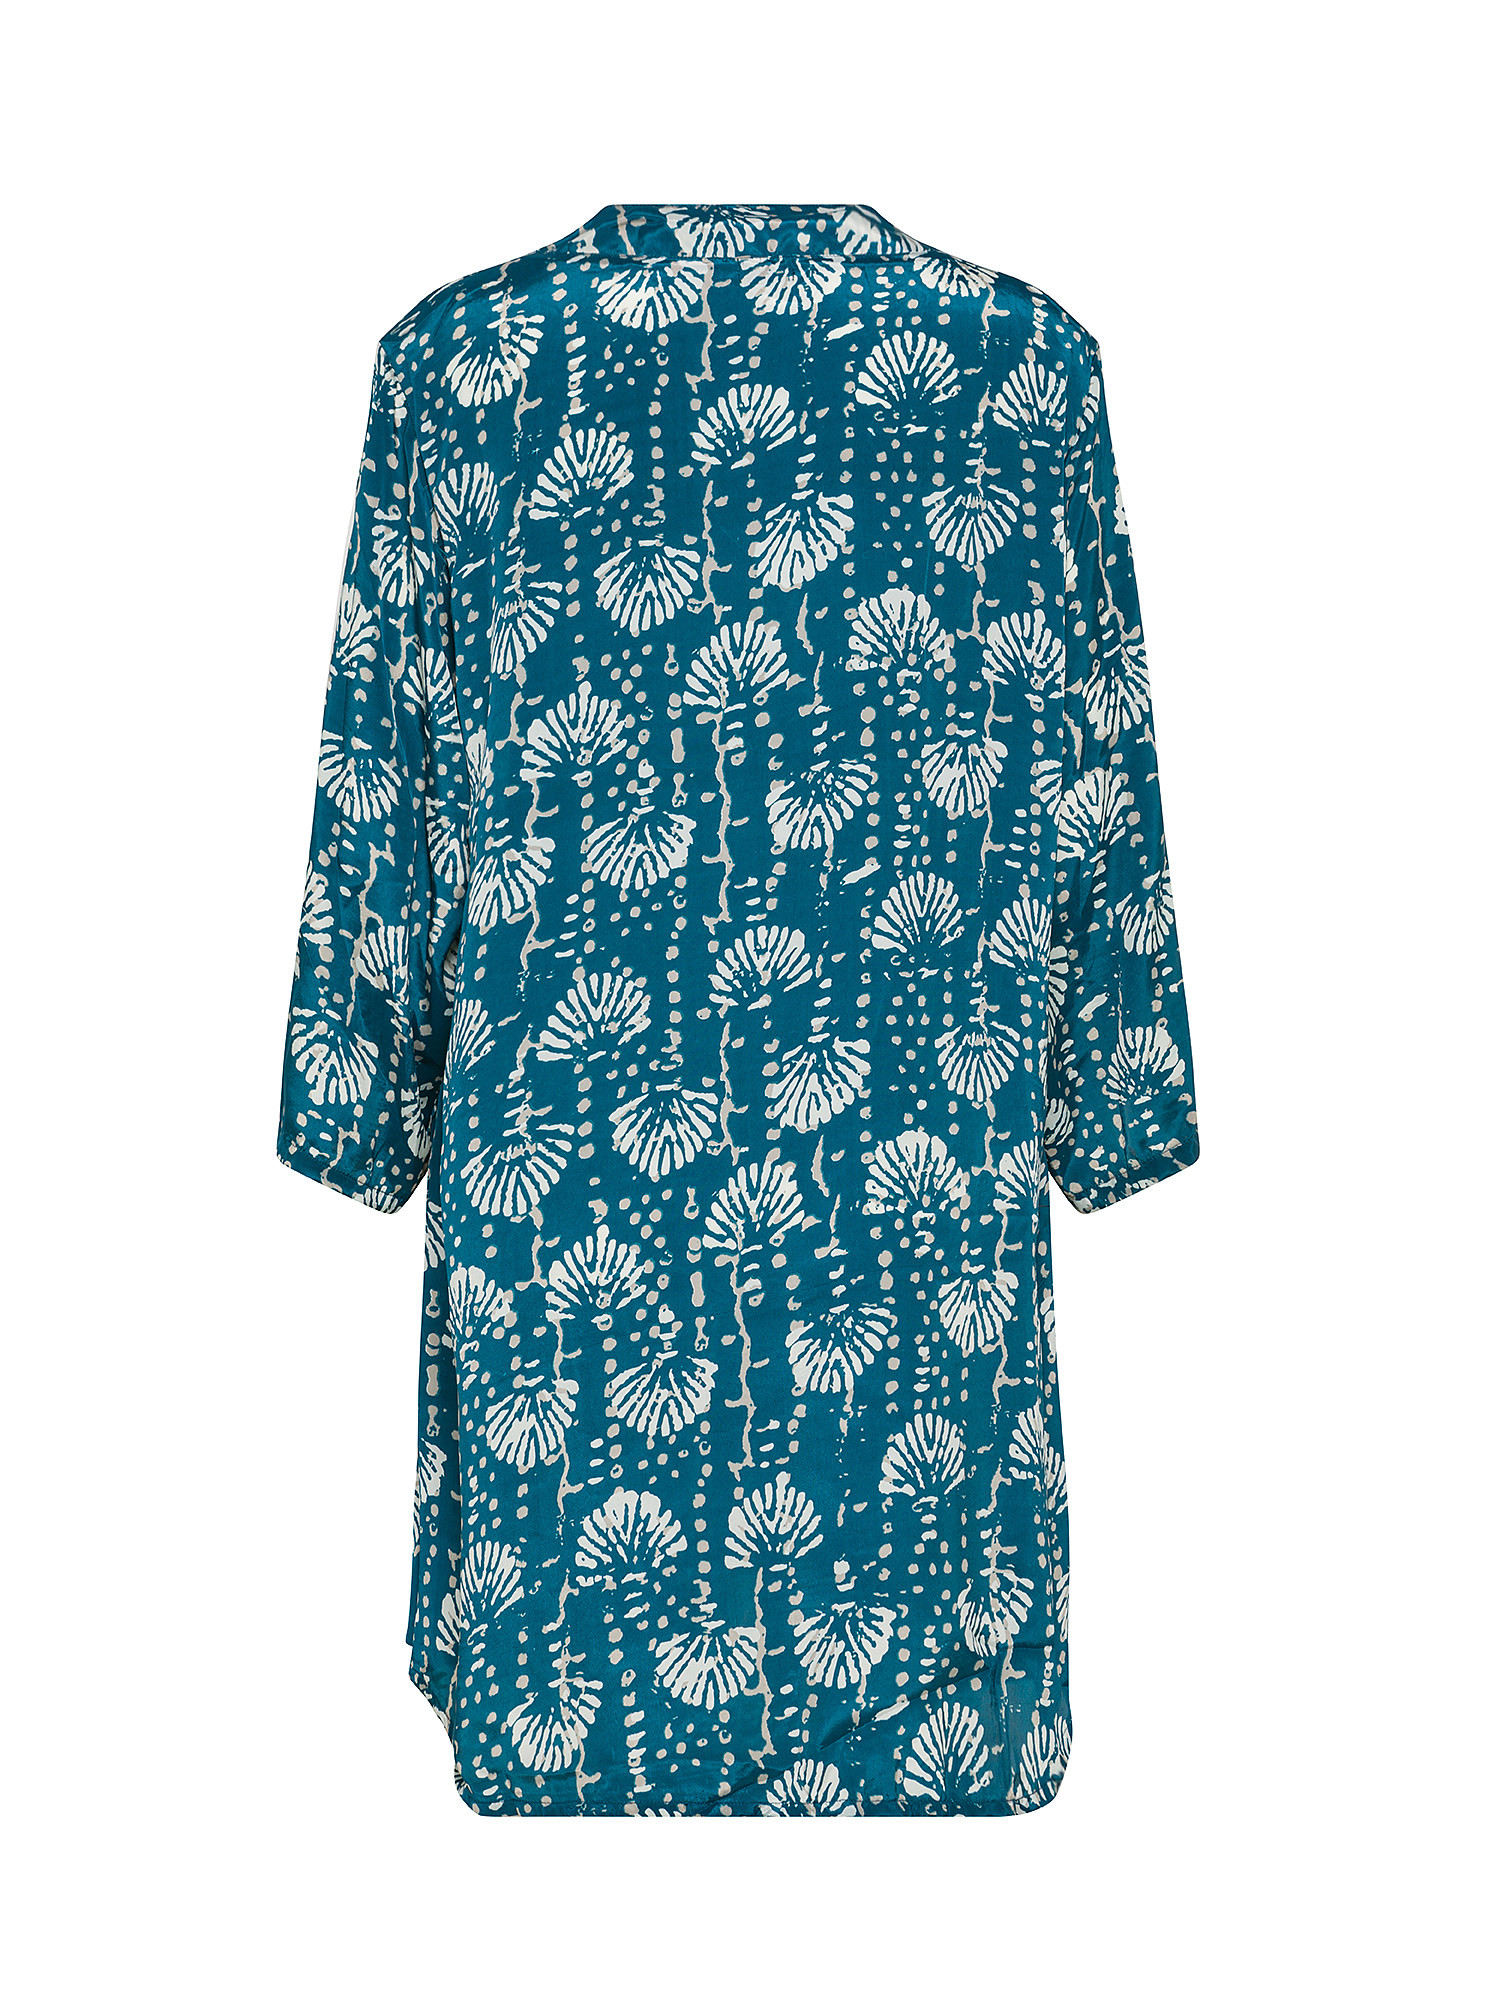 Koan - Patterned tunic, Green teal, large image number 1